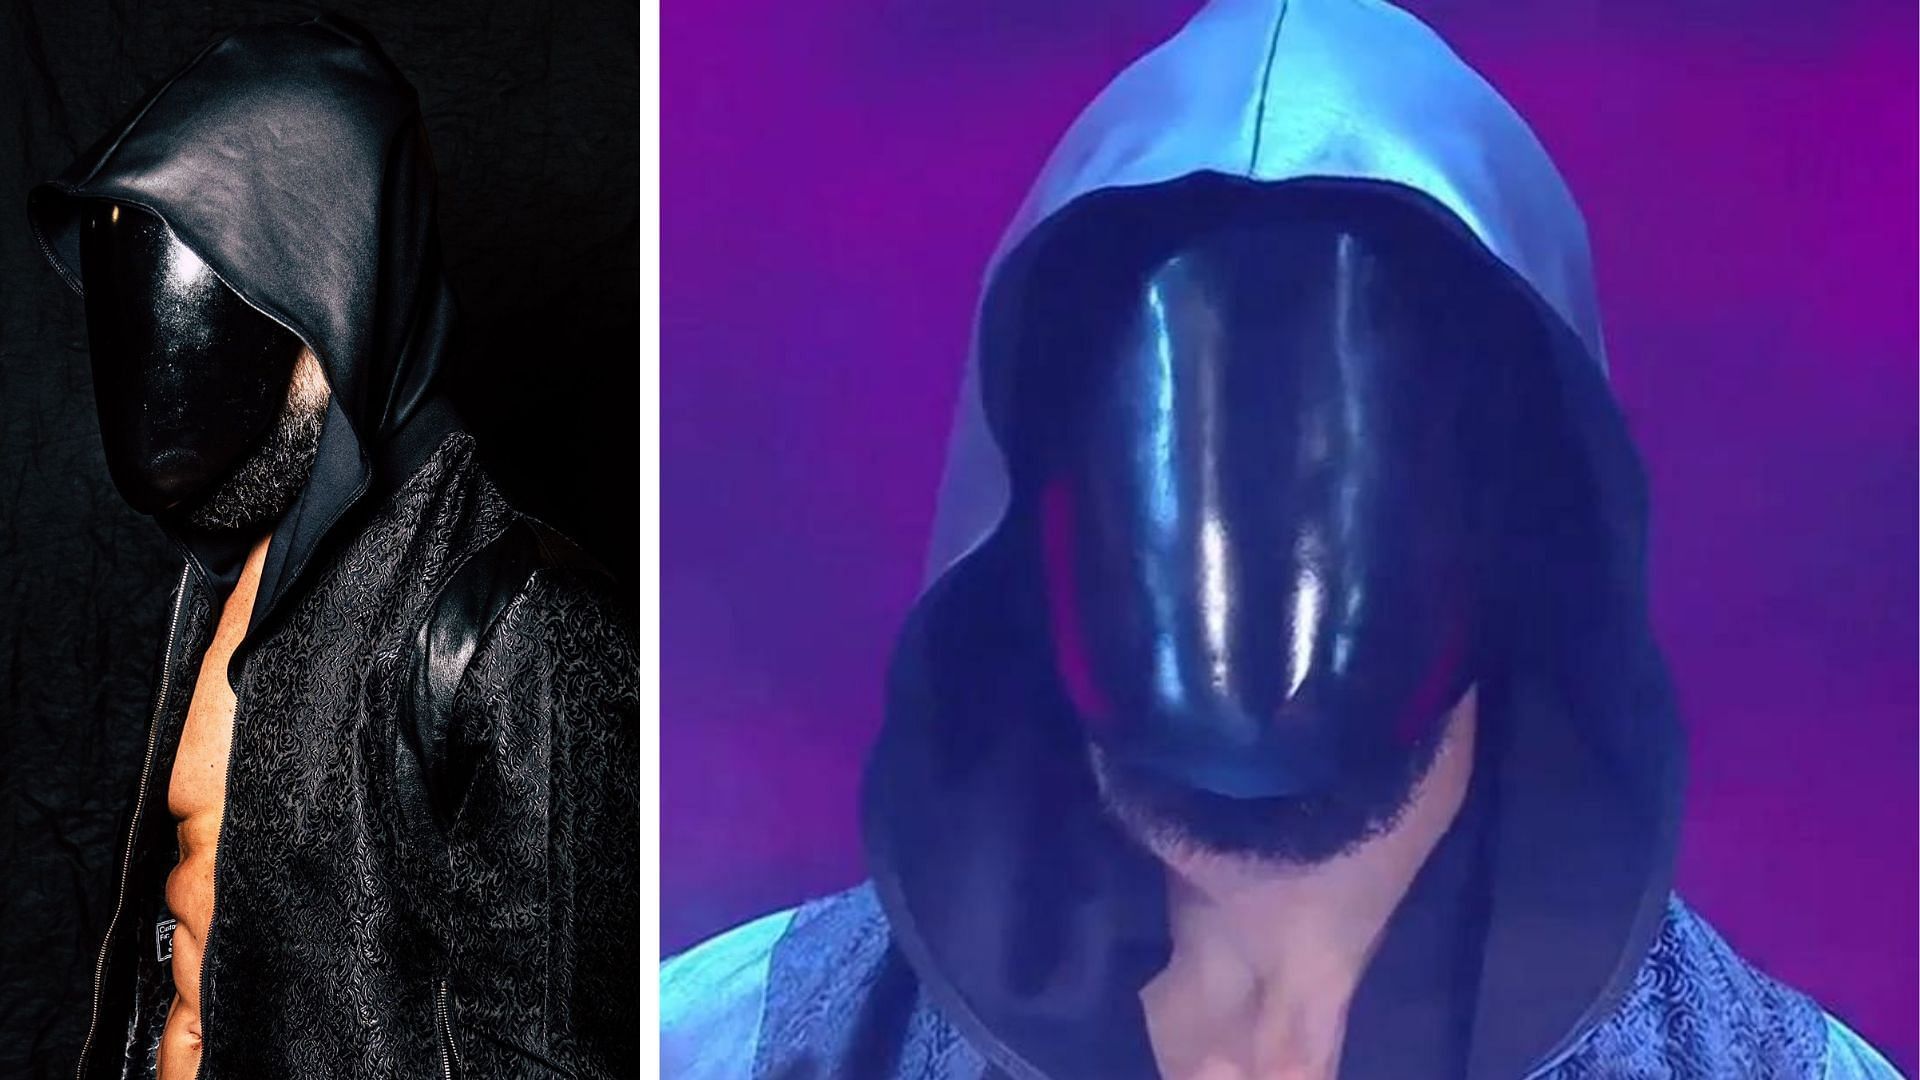 Finn Balor recently has started wearing masks during his entrances at premium live events